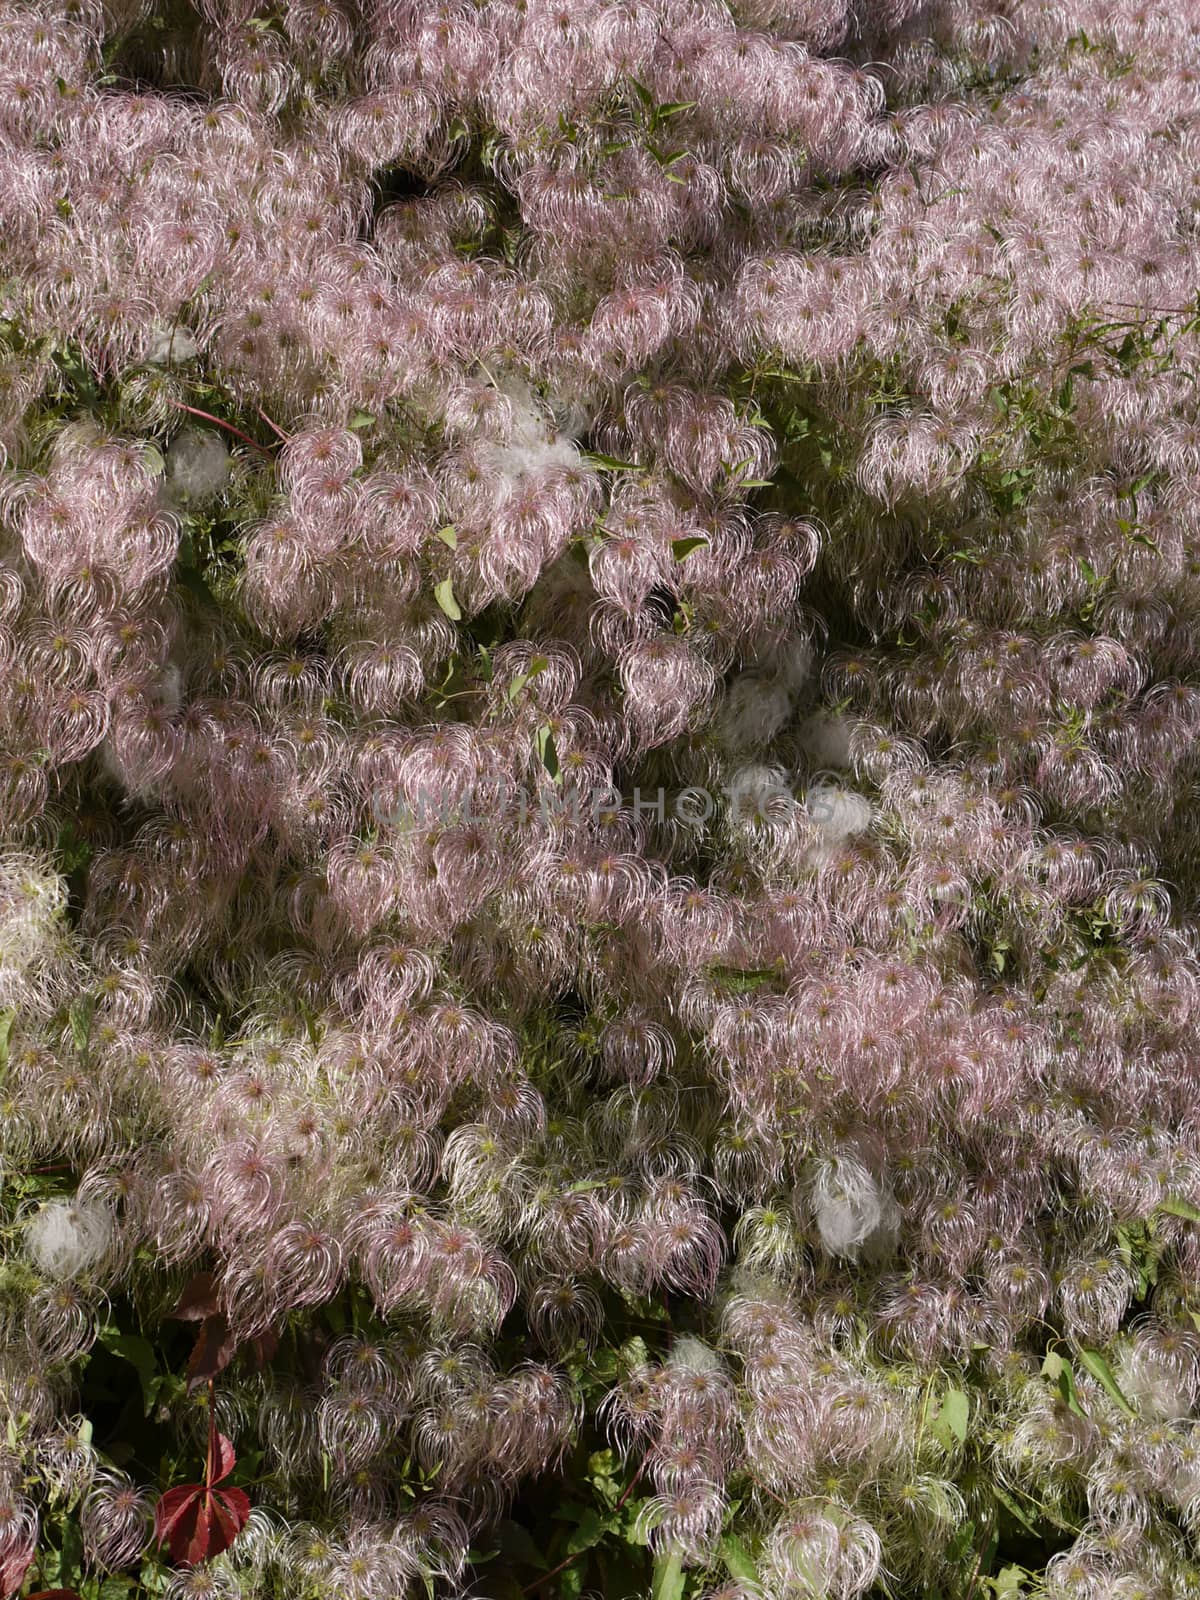 An unusual exotic plant with pink fluffy inflorescences, similar by Adamchuk